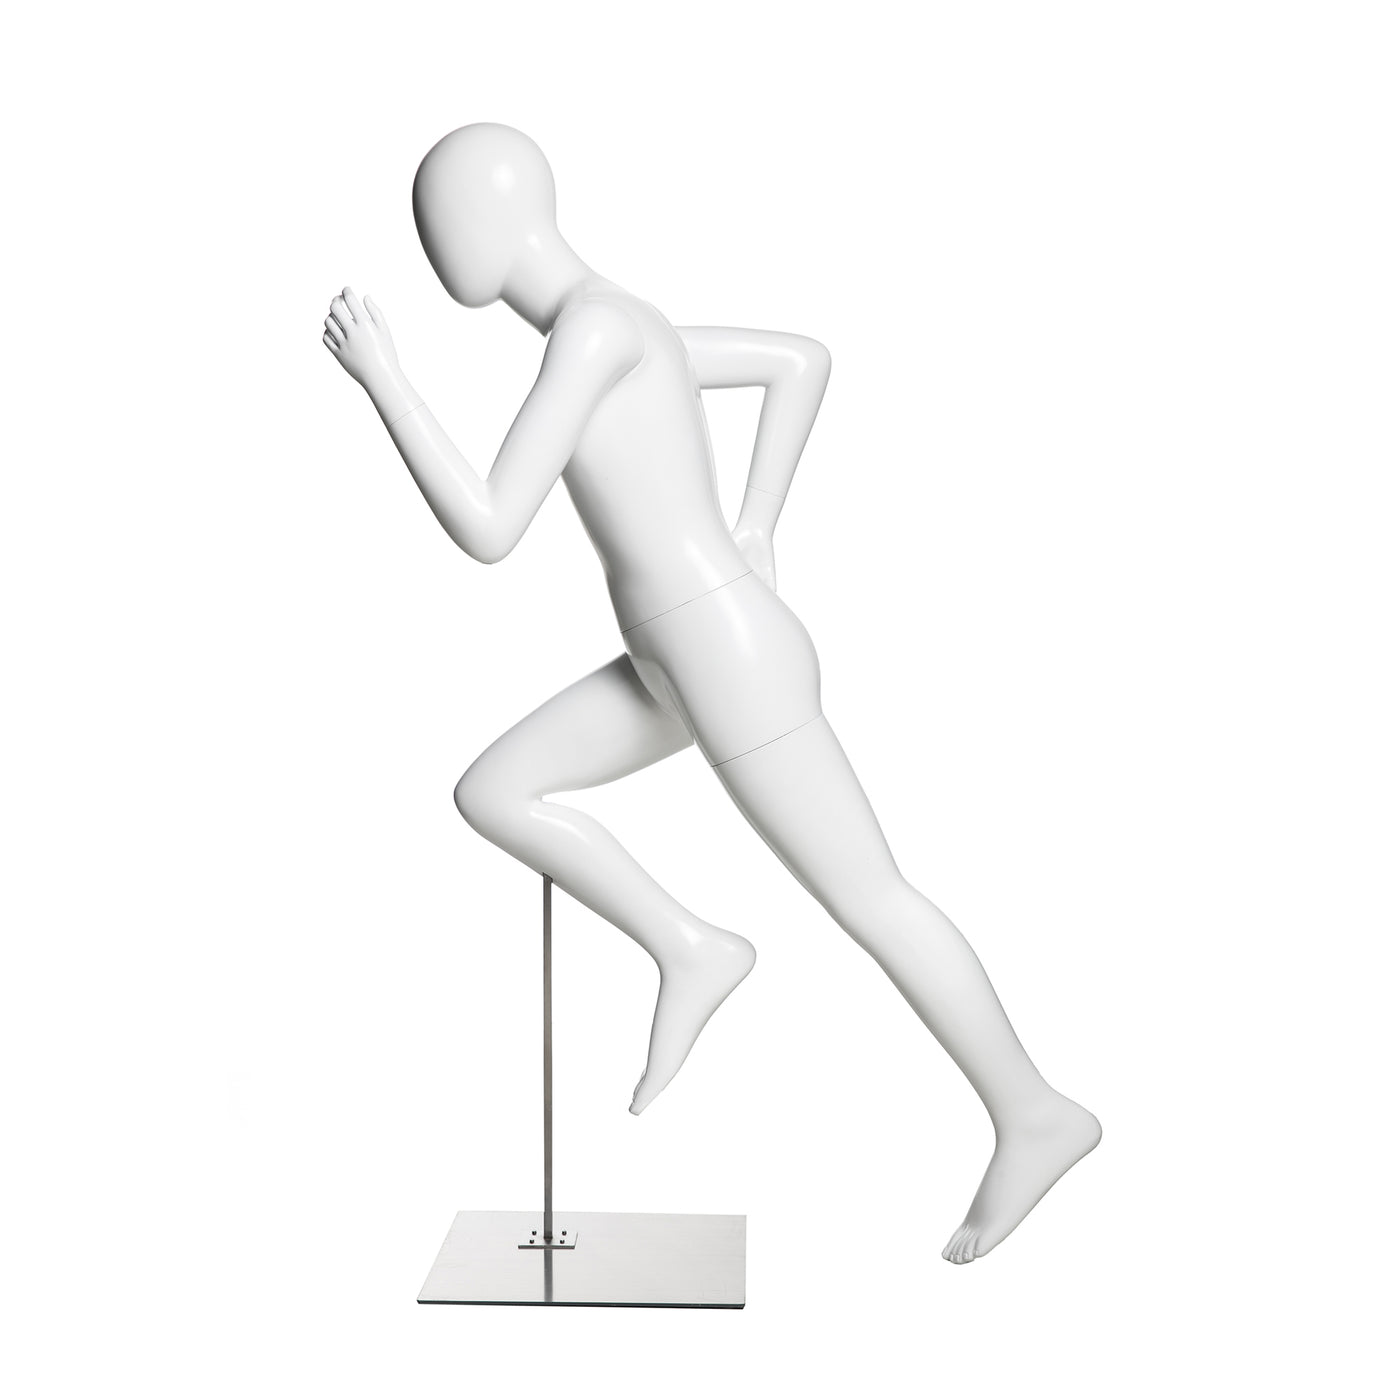 Walking or Hiking Pose Male Mannequin - Gloss White - Red 3 Display